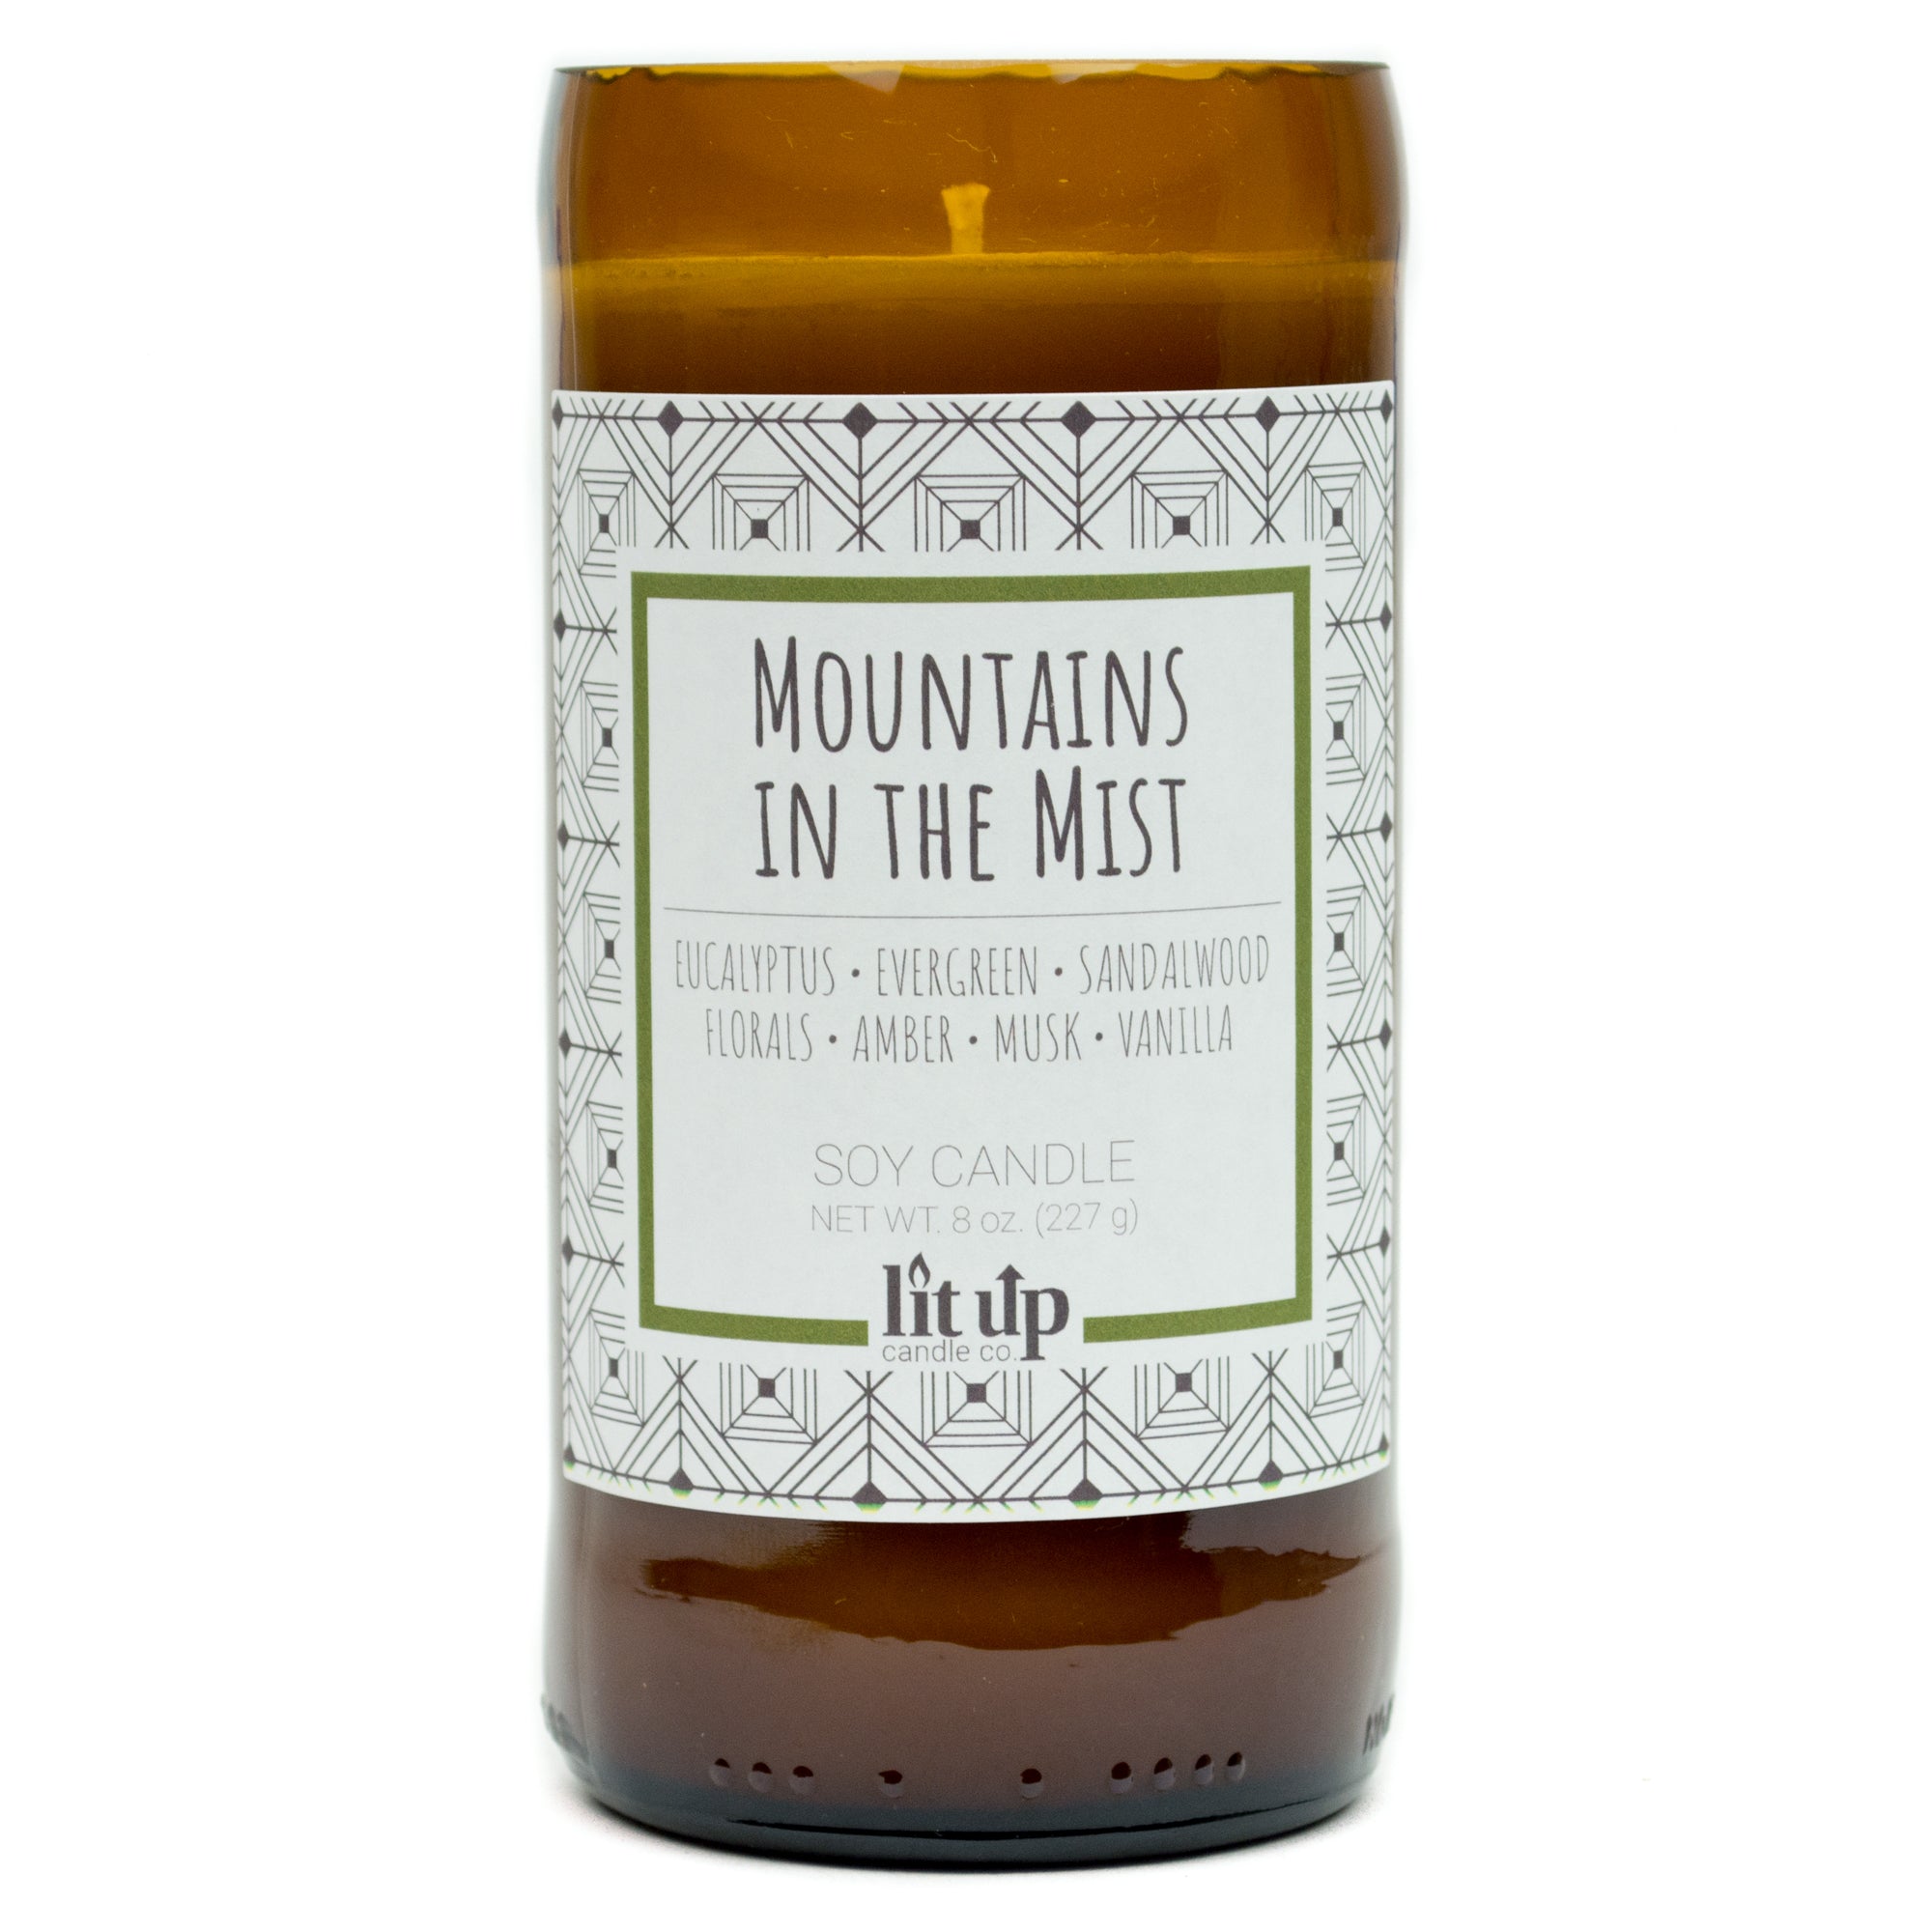 Mountains in the Mist scented 8 oz. soy candle in upcycled beer bottle - FKA Earthen Oak